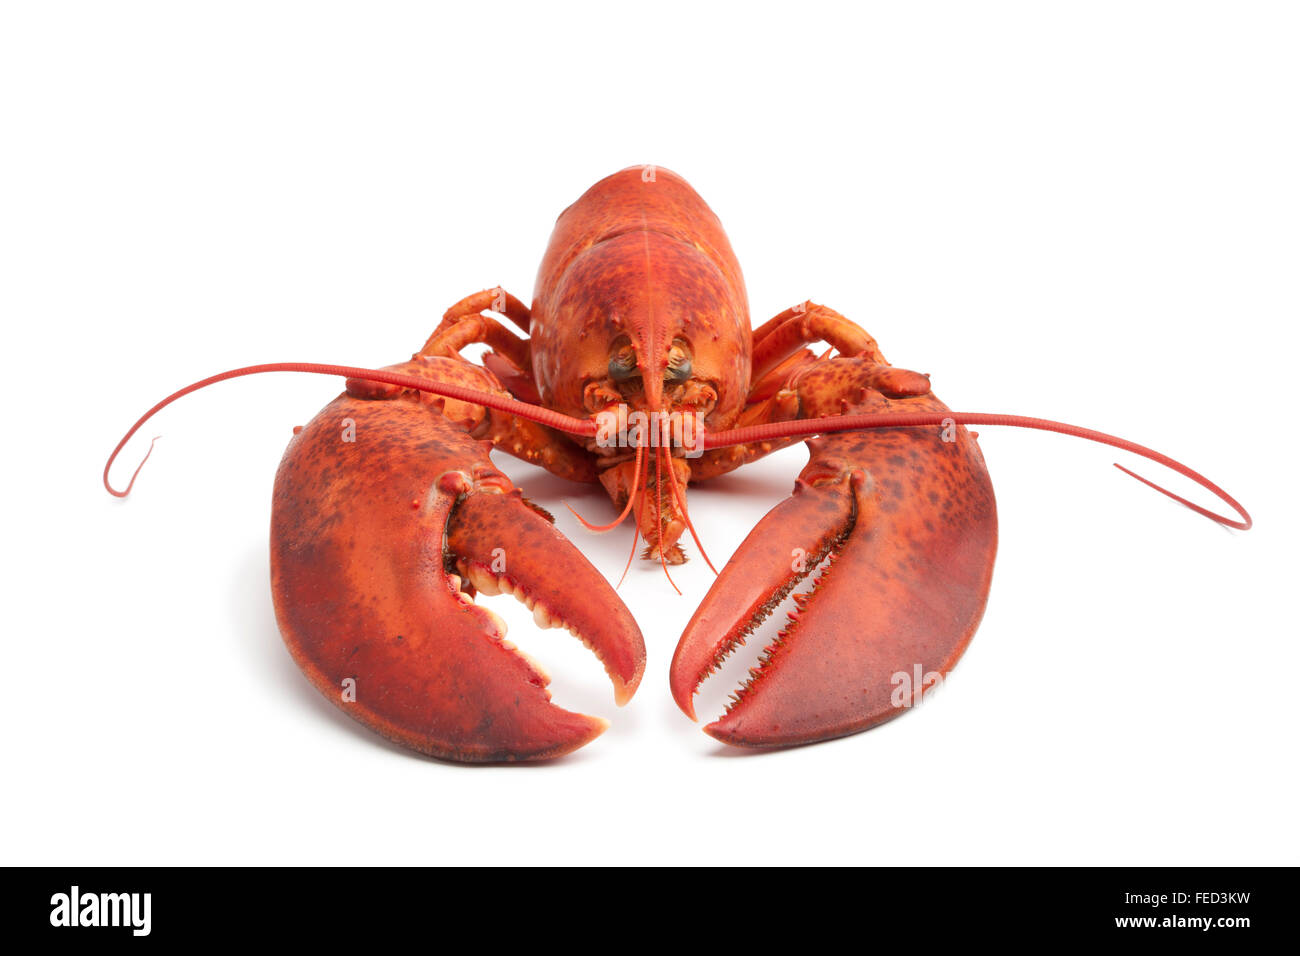 Single fresh cooked lobster on white background Stock Photo